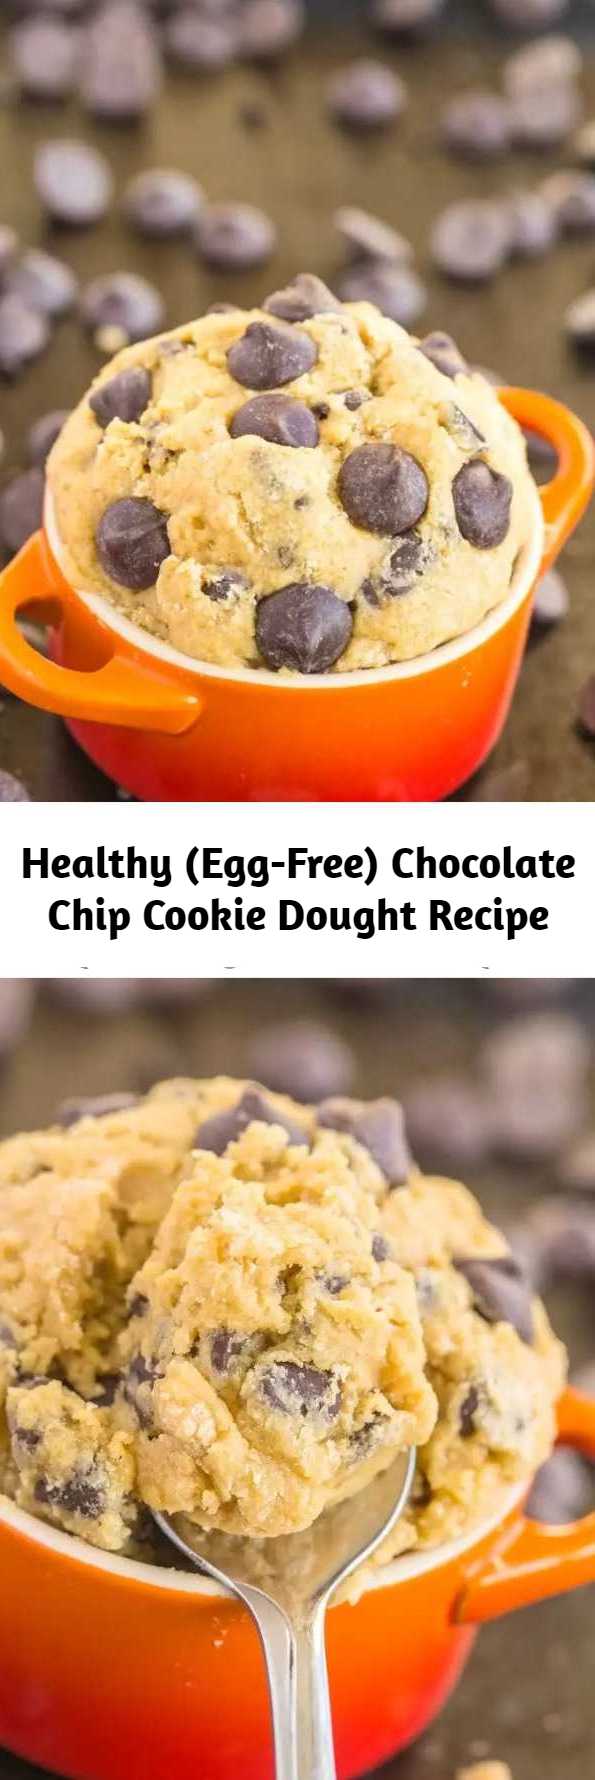 Healthy (Egg-Free) Chocolate Chip Cookie Dought Recipe - Smooth, creamy and ready in just five minutes, this healthy classic cookie dough for one is the ultimate snack or healthy dessert to have on hand! With no butter, flour, eggs, refined sugar or oil, it's a much healthier twist on the classic and naturally gluten-free, vegan, paleo, dairy free and with a high protein option!